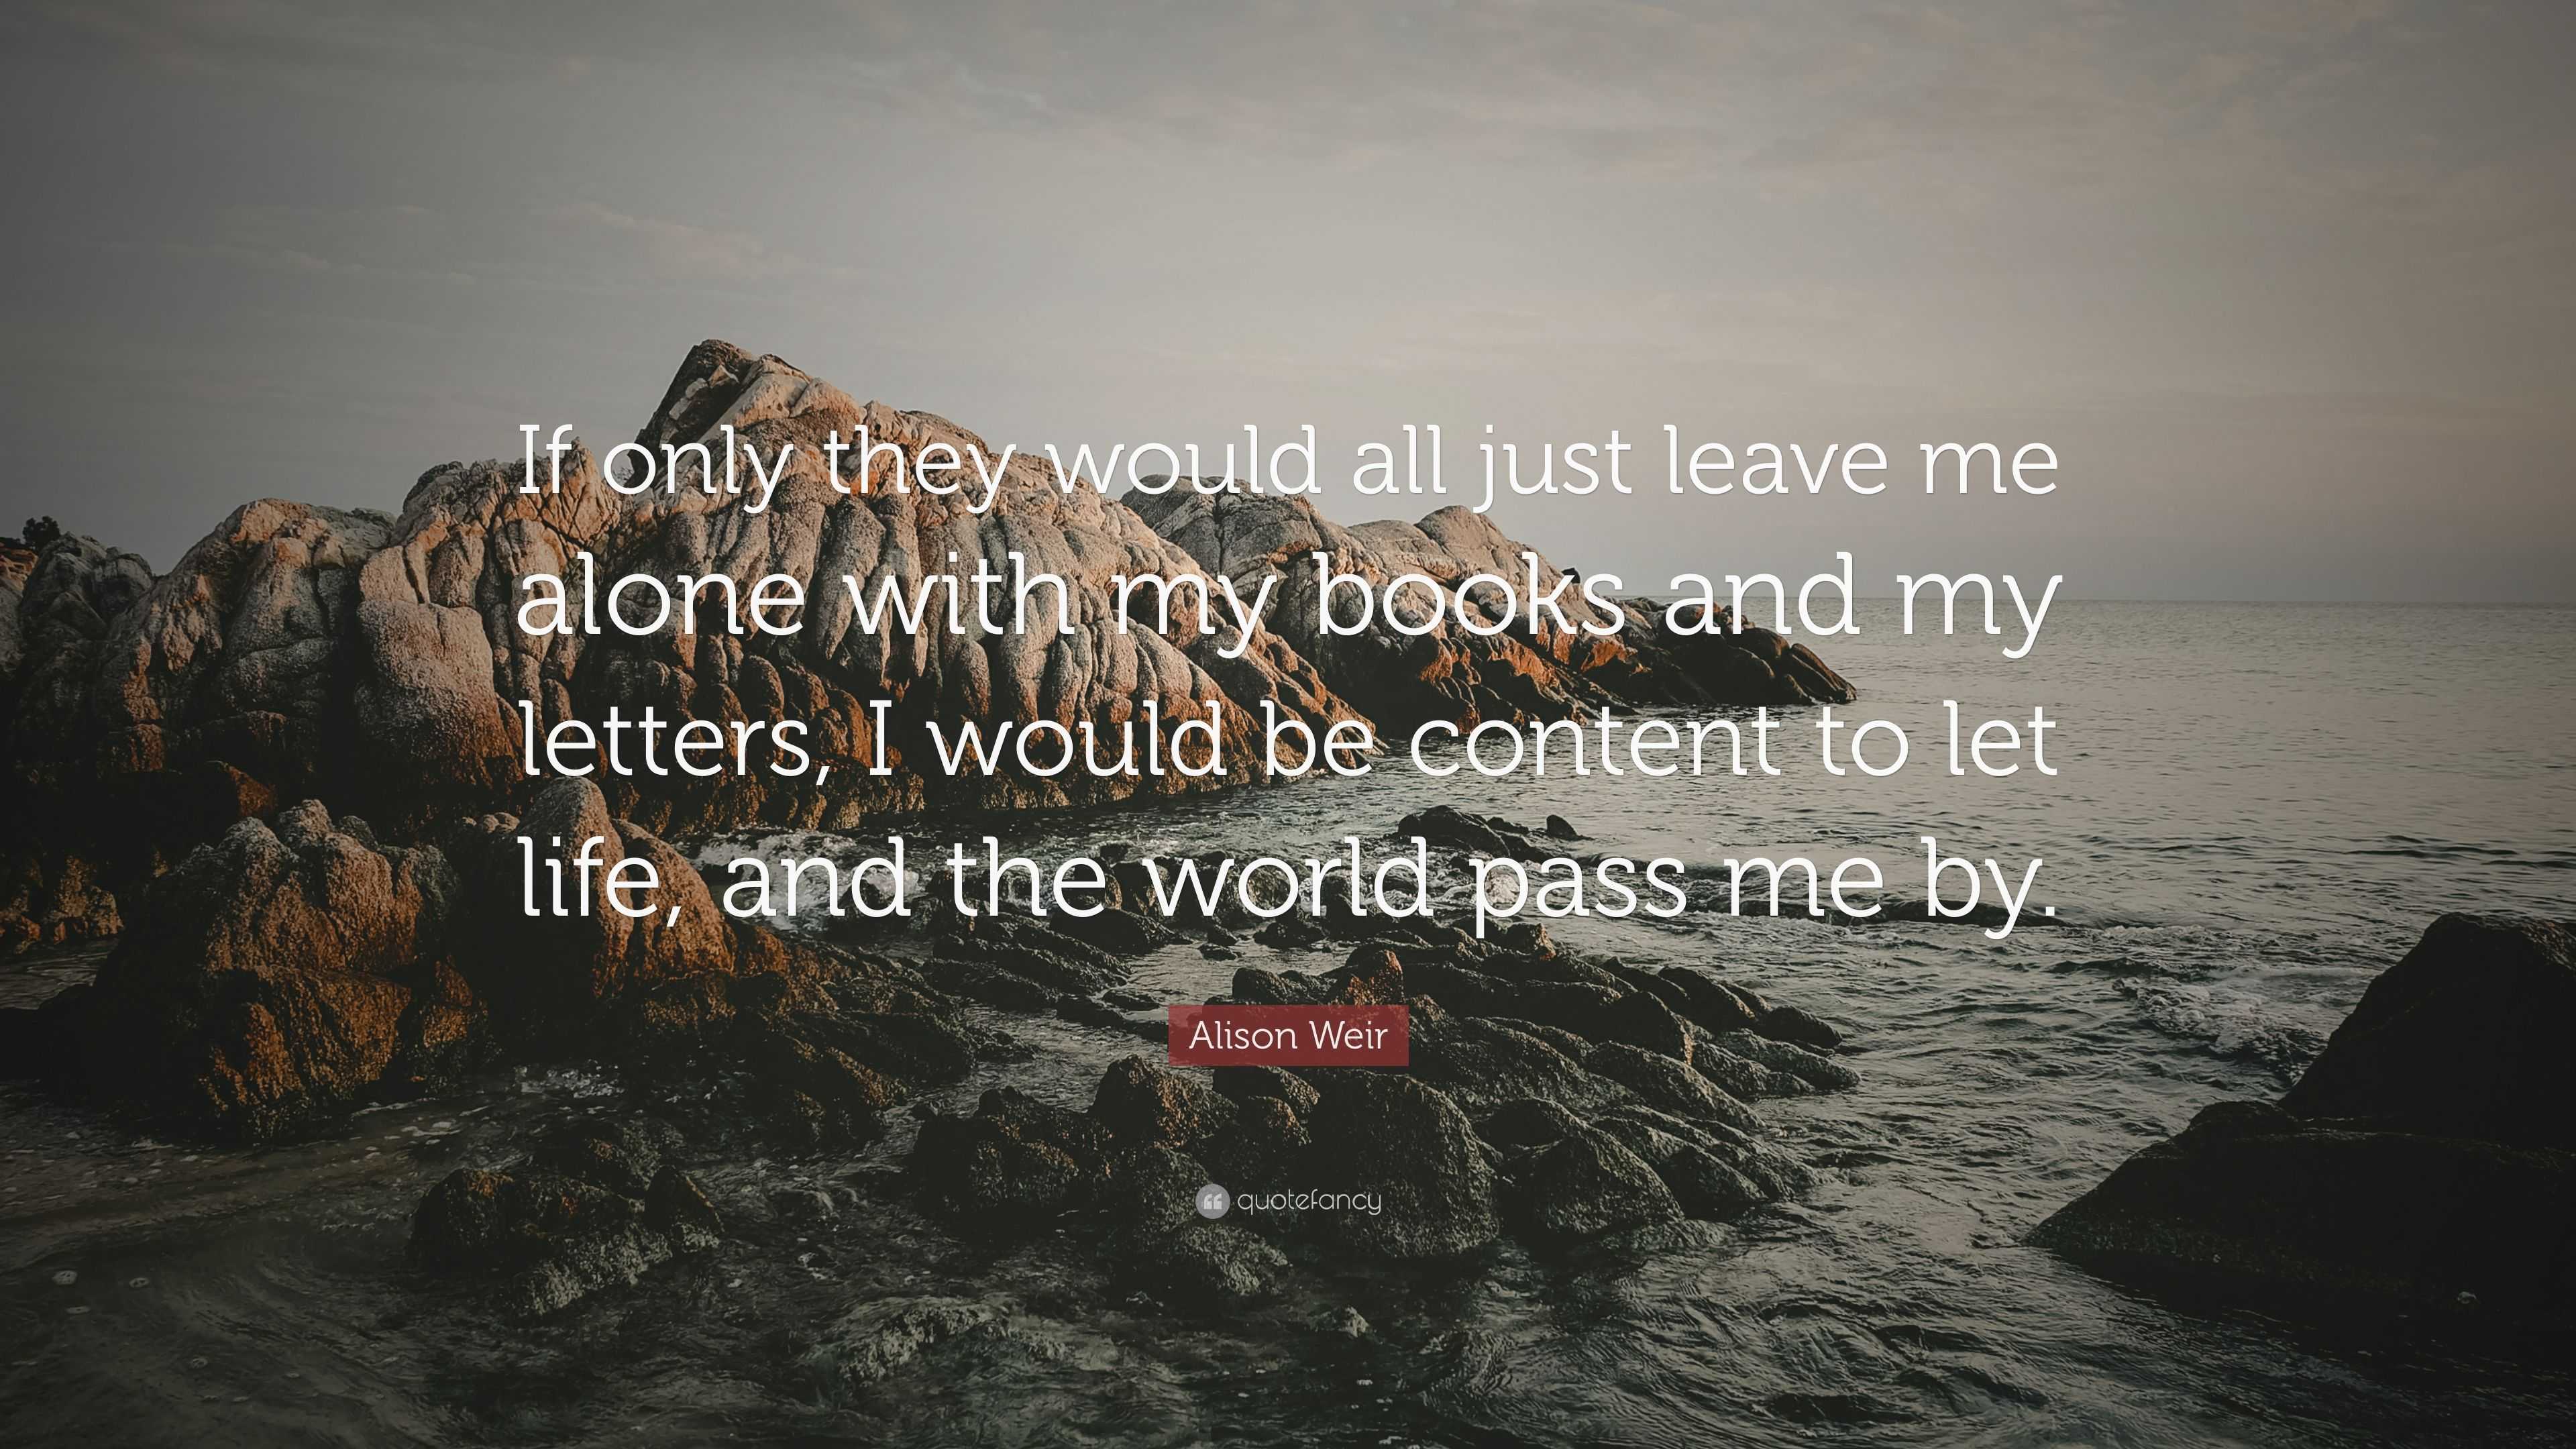 Alison Weir Quote: “If only they would all just leave me alone with my  books and my letters, I would be content to let life, and the world p...”